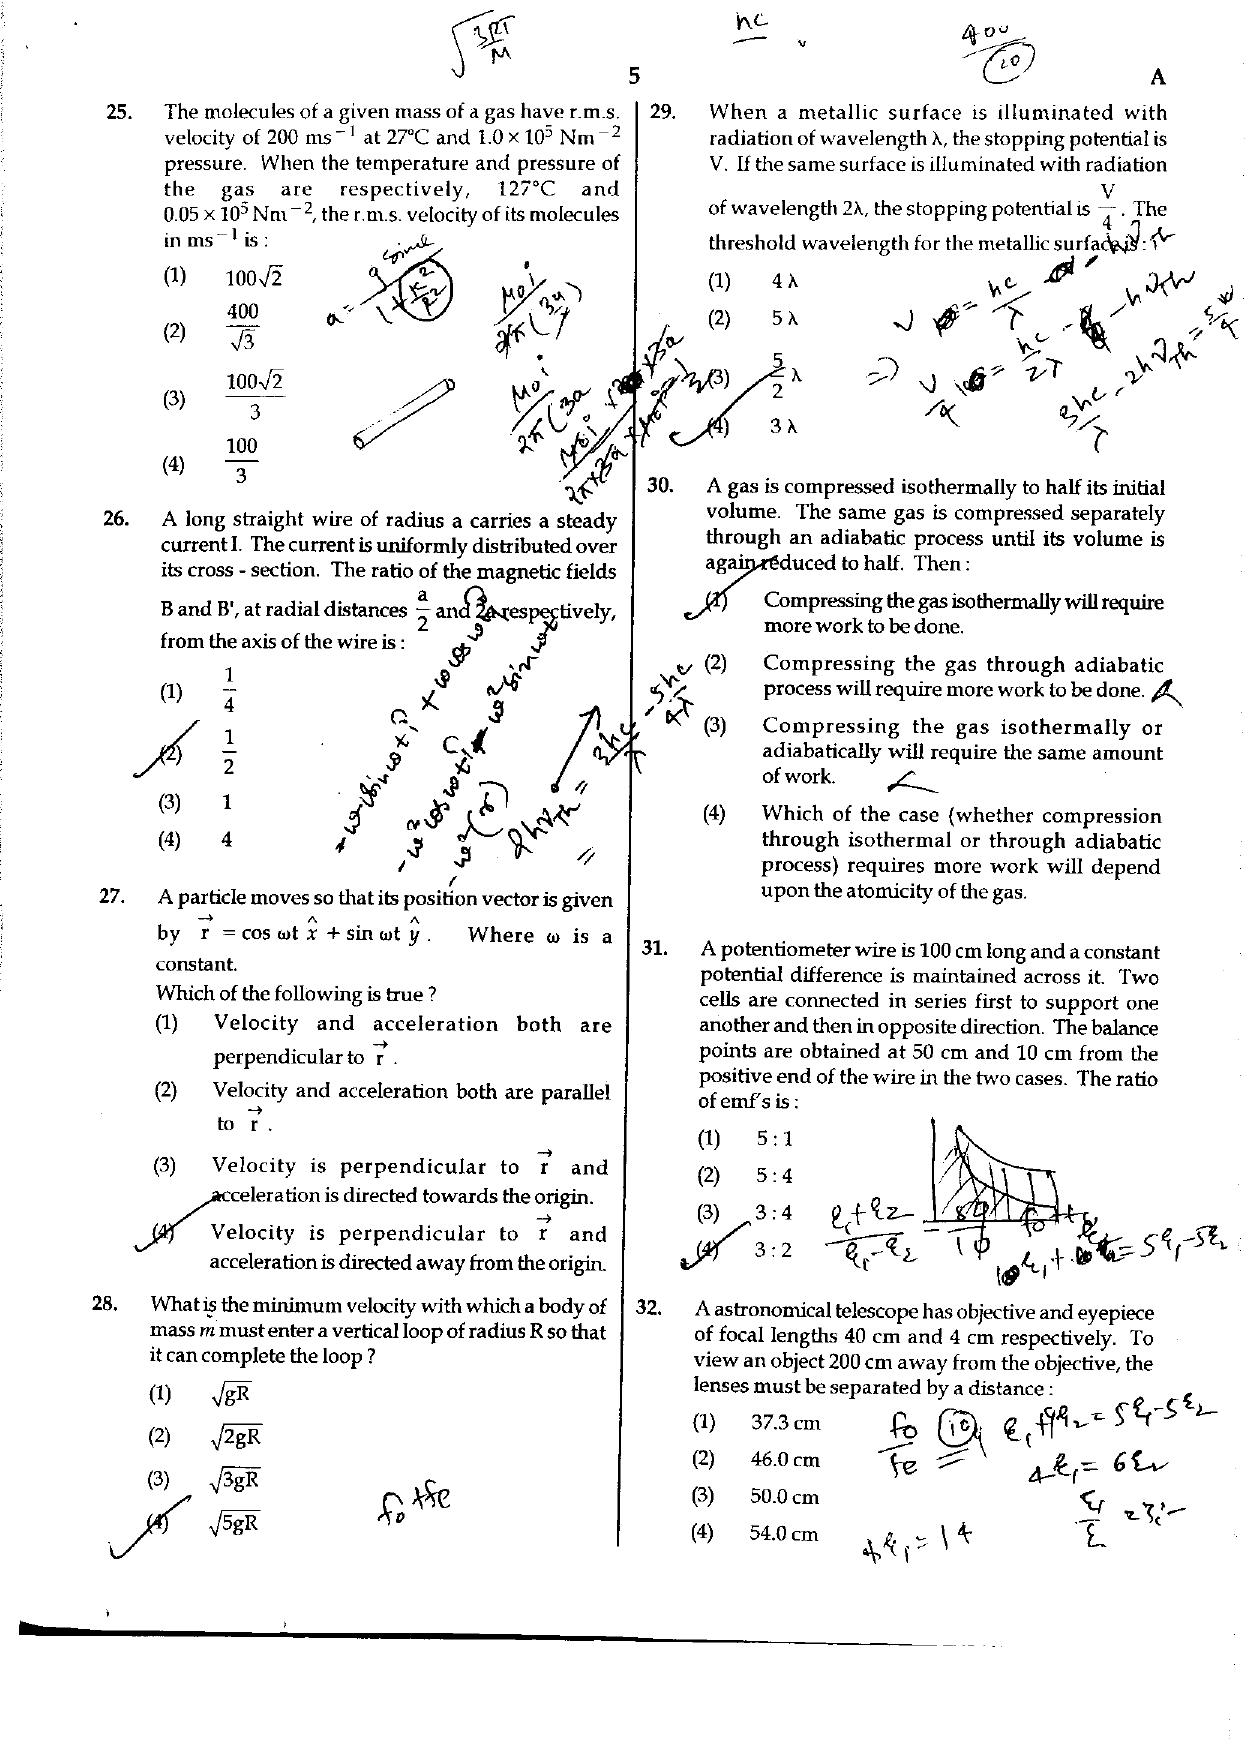 NEET Code A/ P/ W 2016 Question Paper - Page 5